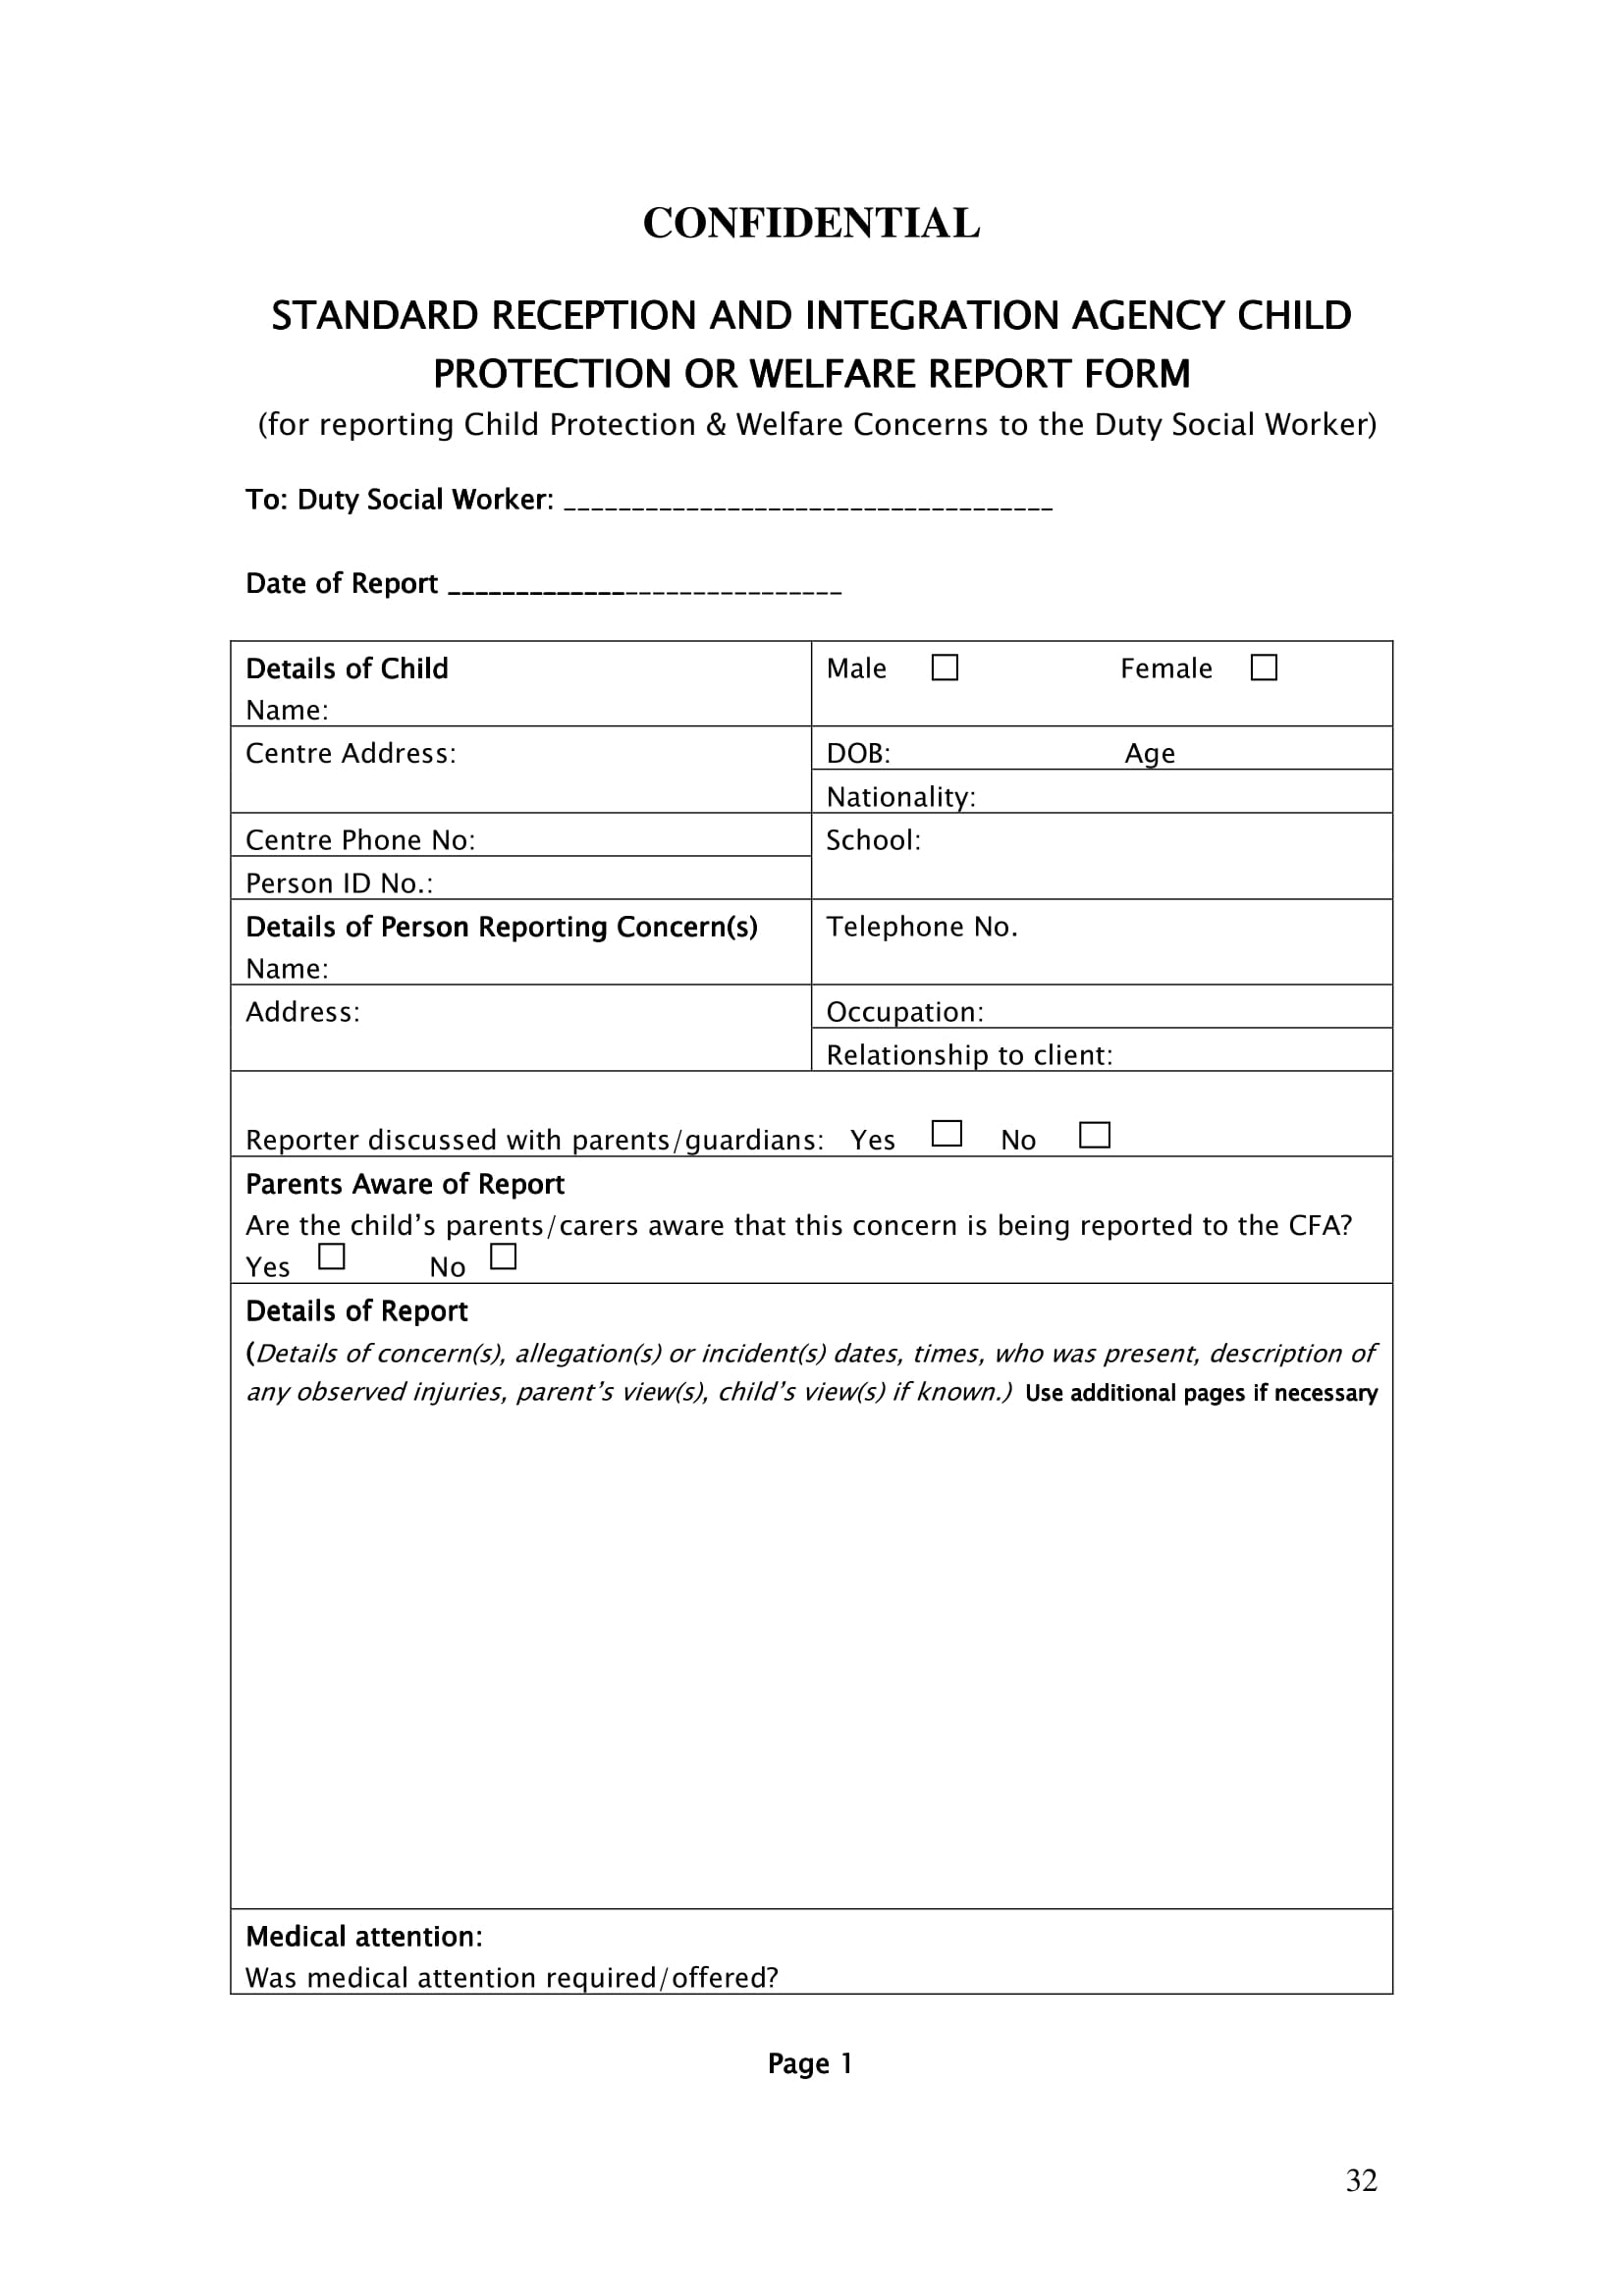 standard child protection and welfare report 32